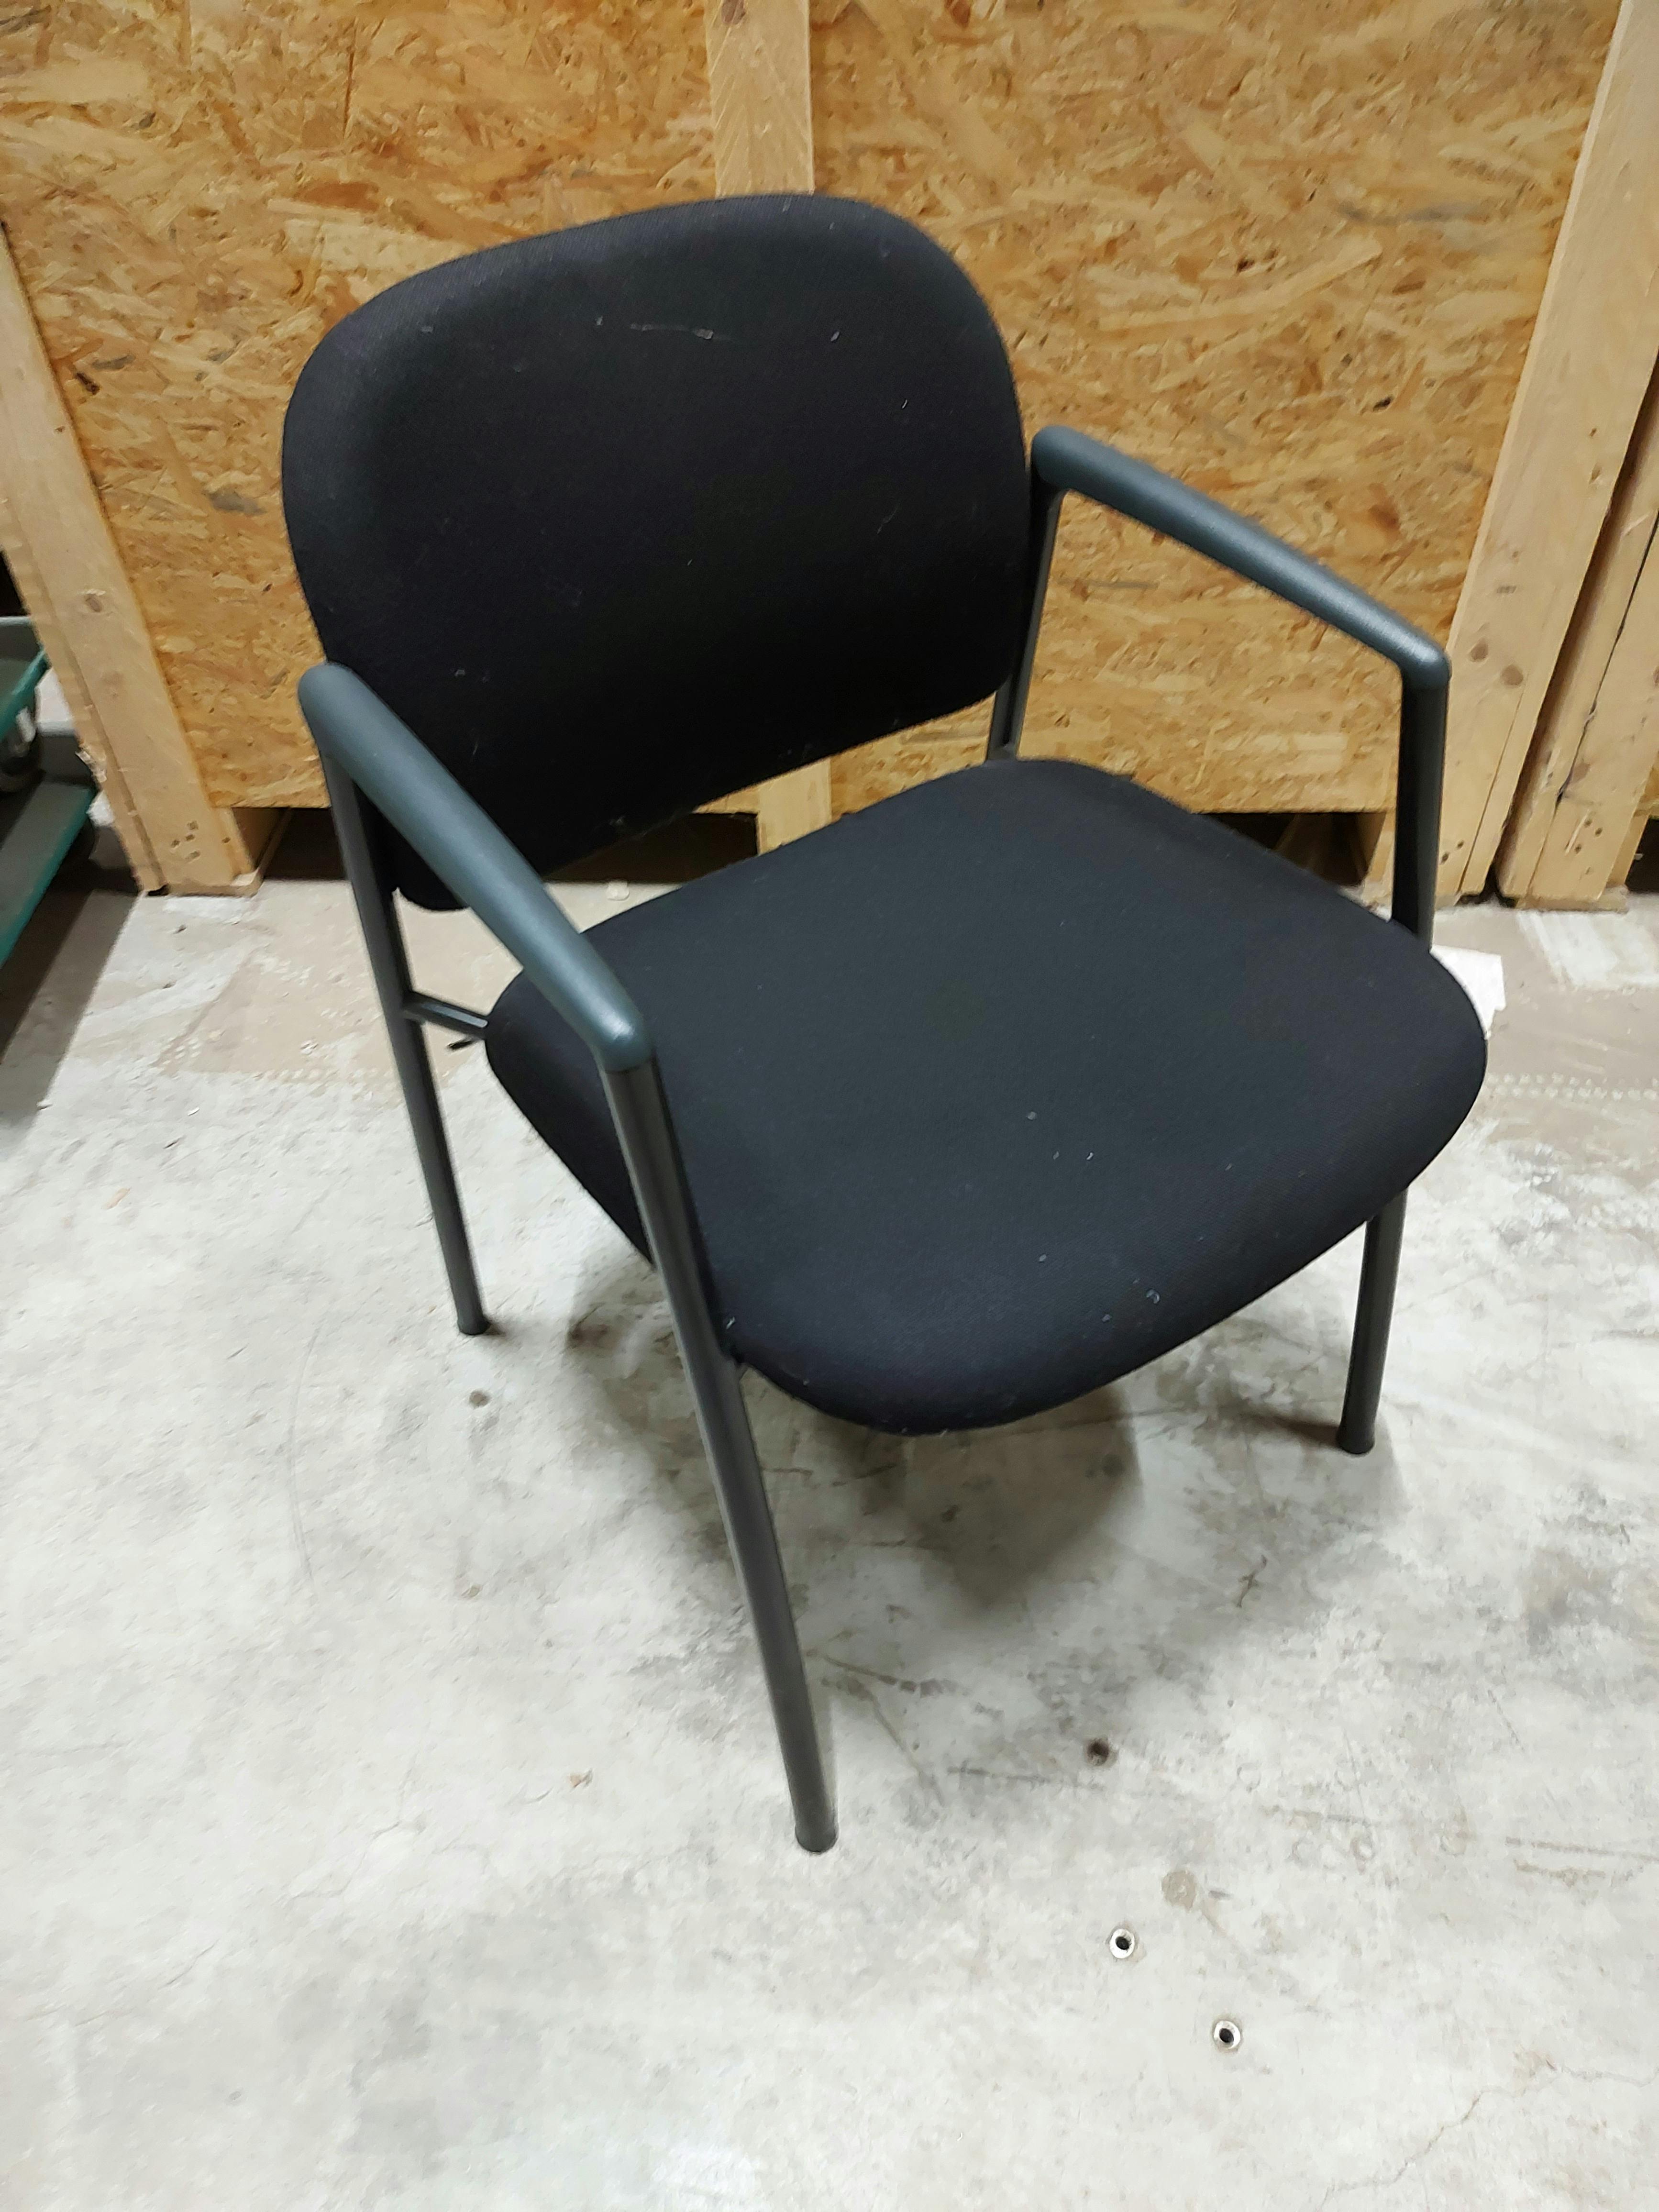 Zwarte stoel / Chaise noir - Second hand quality "Chairs" - Relieve Furniture - 1